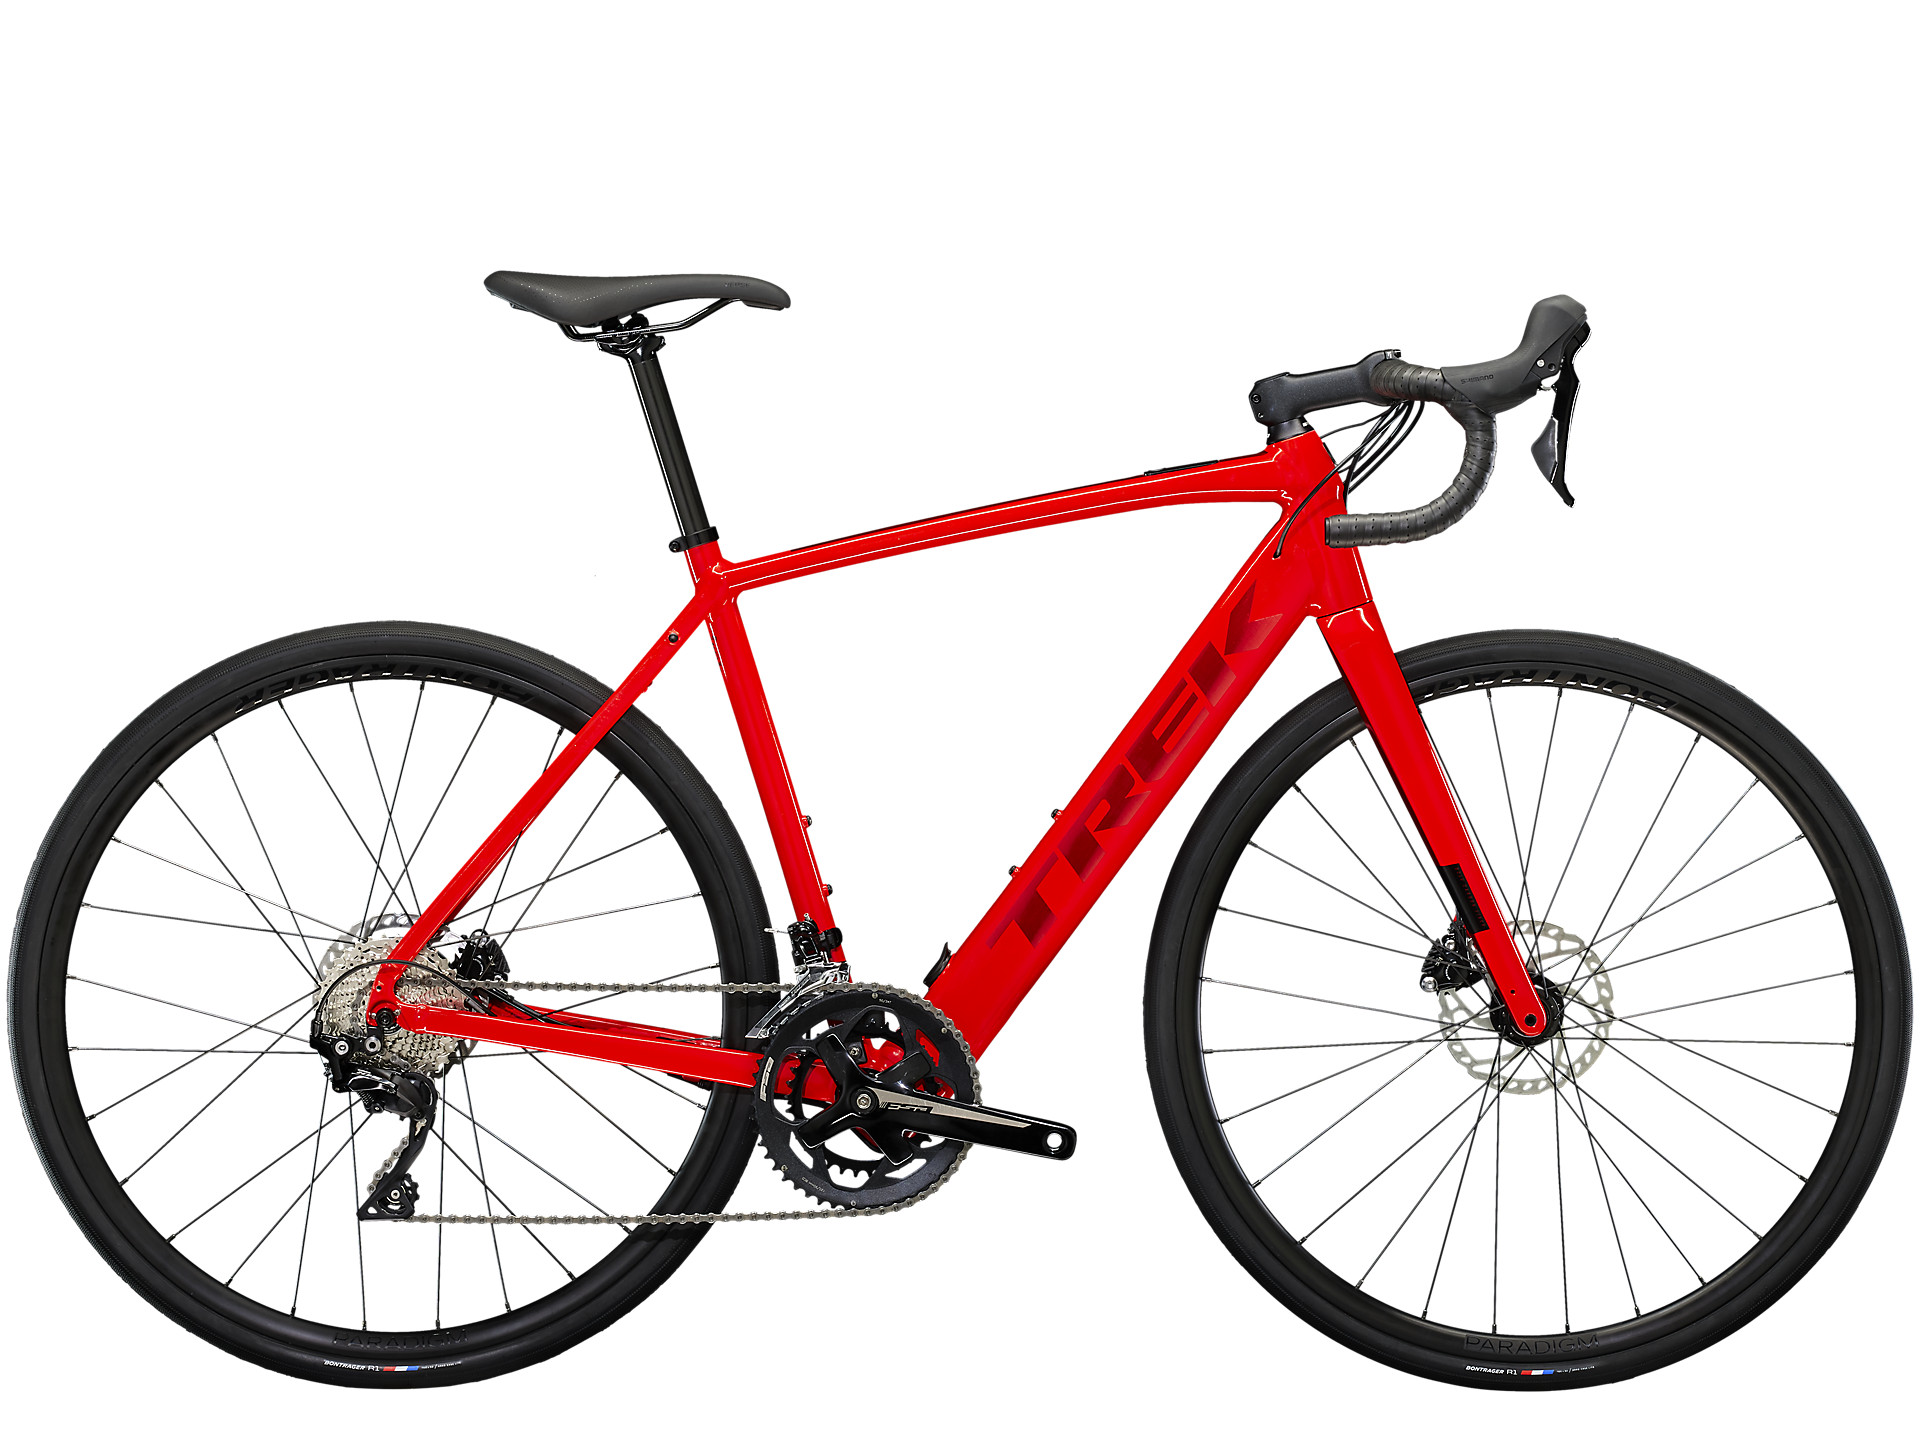 <a href="https://cycles-clement.be/product/domane-al-5-eu-49-viper-red/">Domane+ AL 5 EU 49 Viper Red</a>